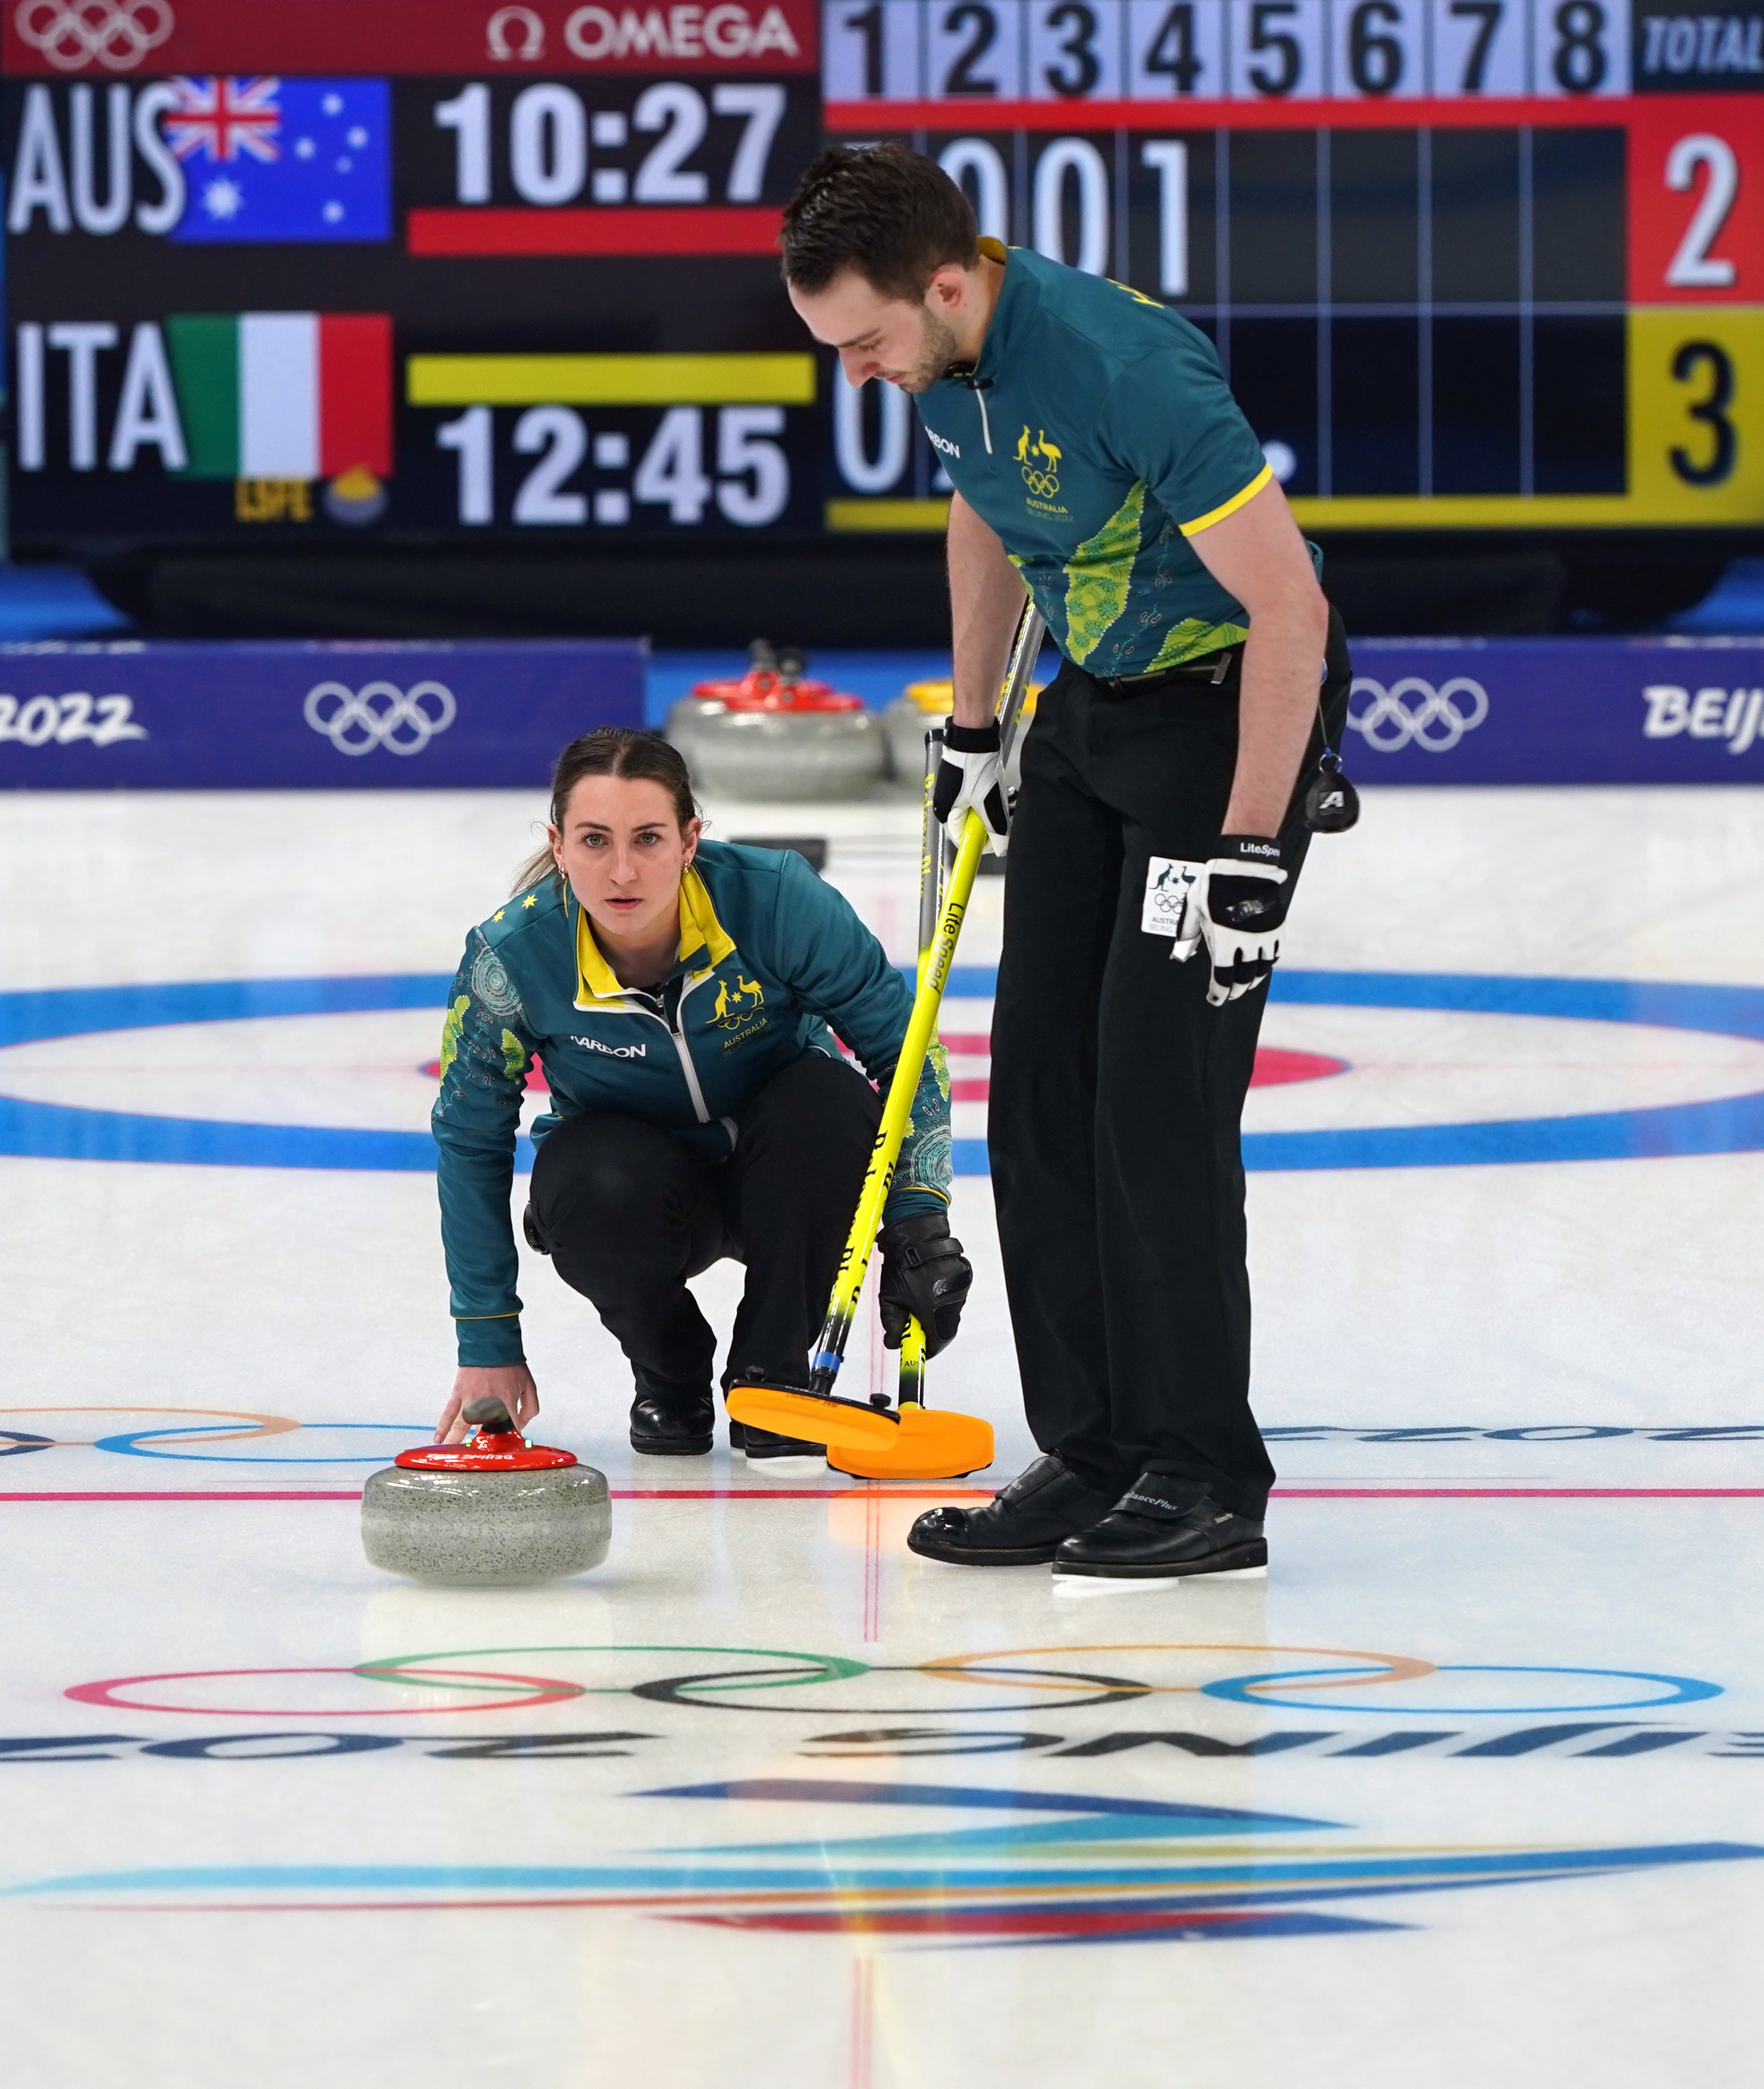 Australia’s Tahli Gill and Dean Hewitt have been allowed to carry on competing despite Gill’s positive Covid test (Andrew Milligan/PA Images).